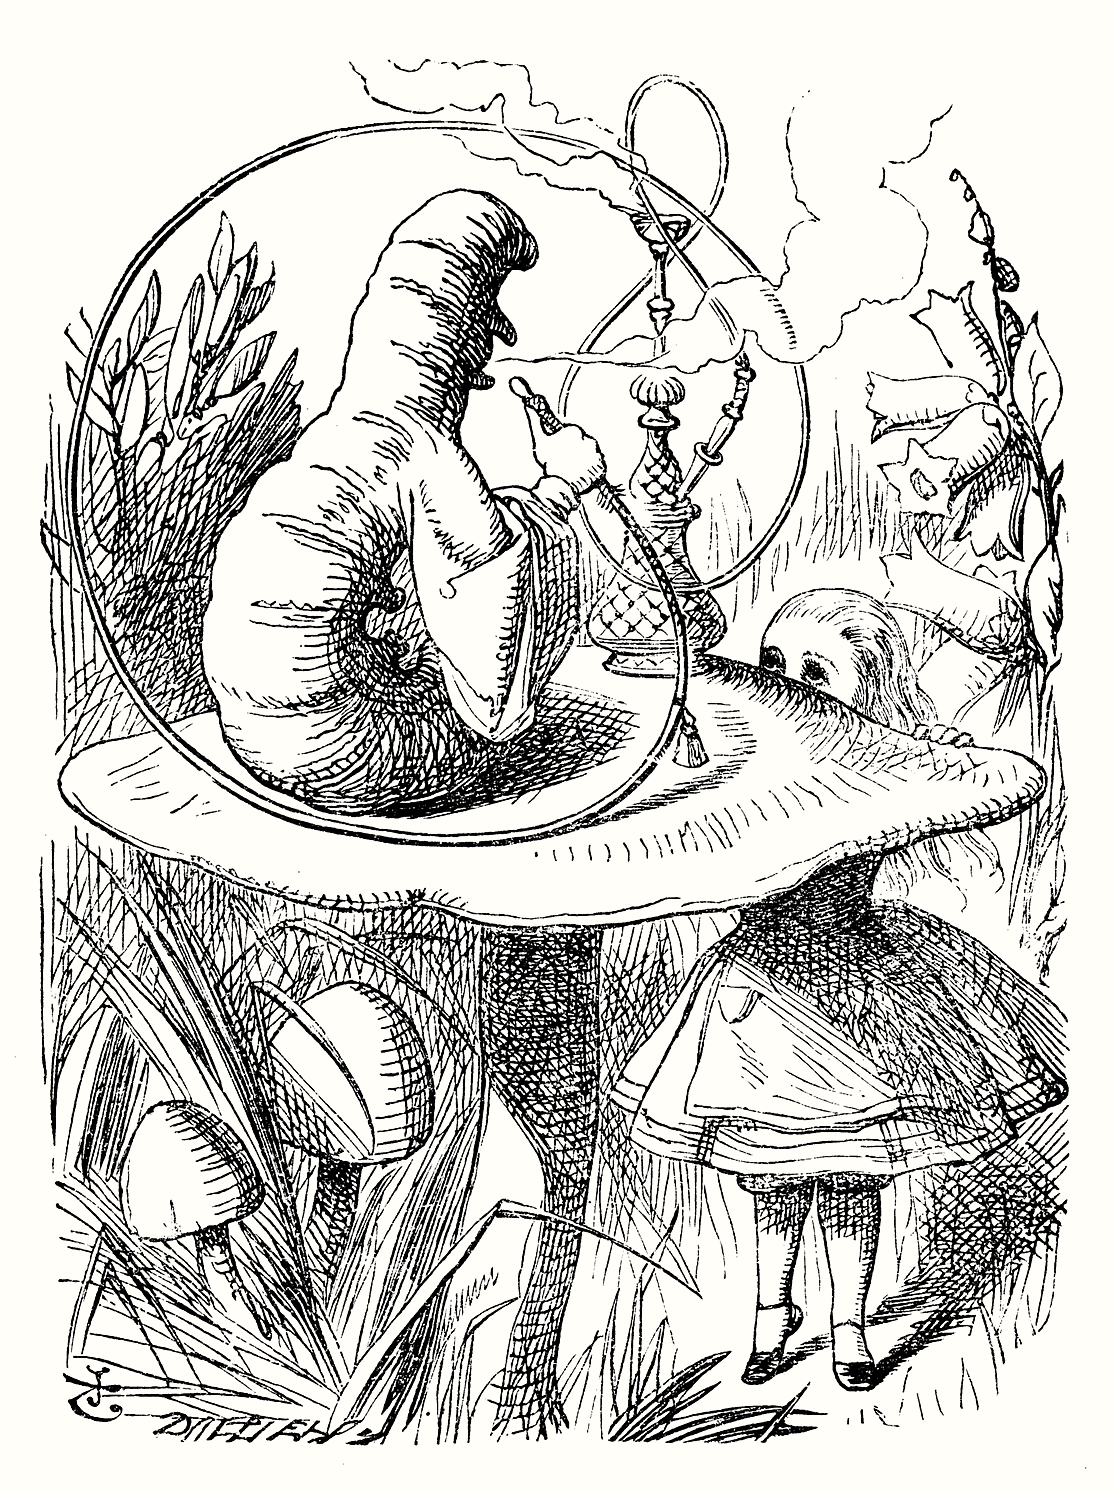 Alice and the Caterpillar by John Tenniel for Alice in Wonderland, Lewis Carroll, 1865